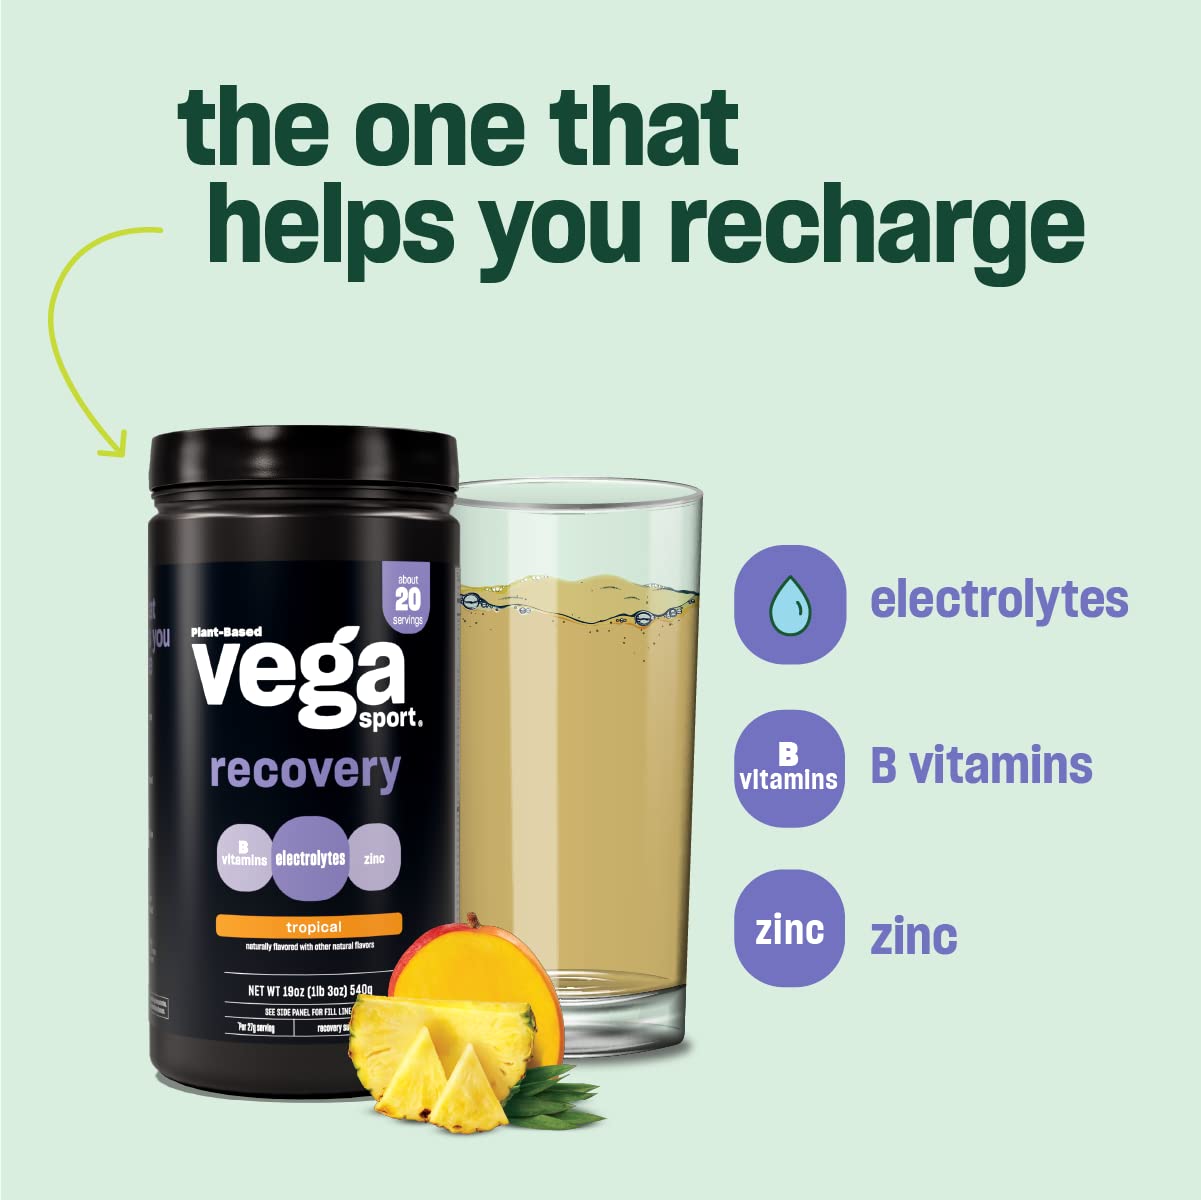 Vega Sport Recovery Tropical (20 Servings) Post Workout Recovery Drink for Women and Men, Electrolytes, Carbohydrates, B-Vitamins, Vitamin C and Protein, Vegan, Gluten Free, Dairy Free, 1.2lbs